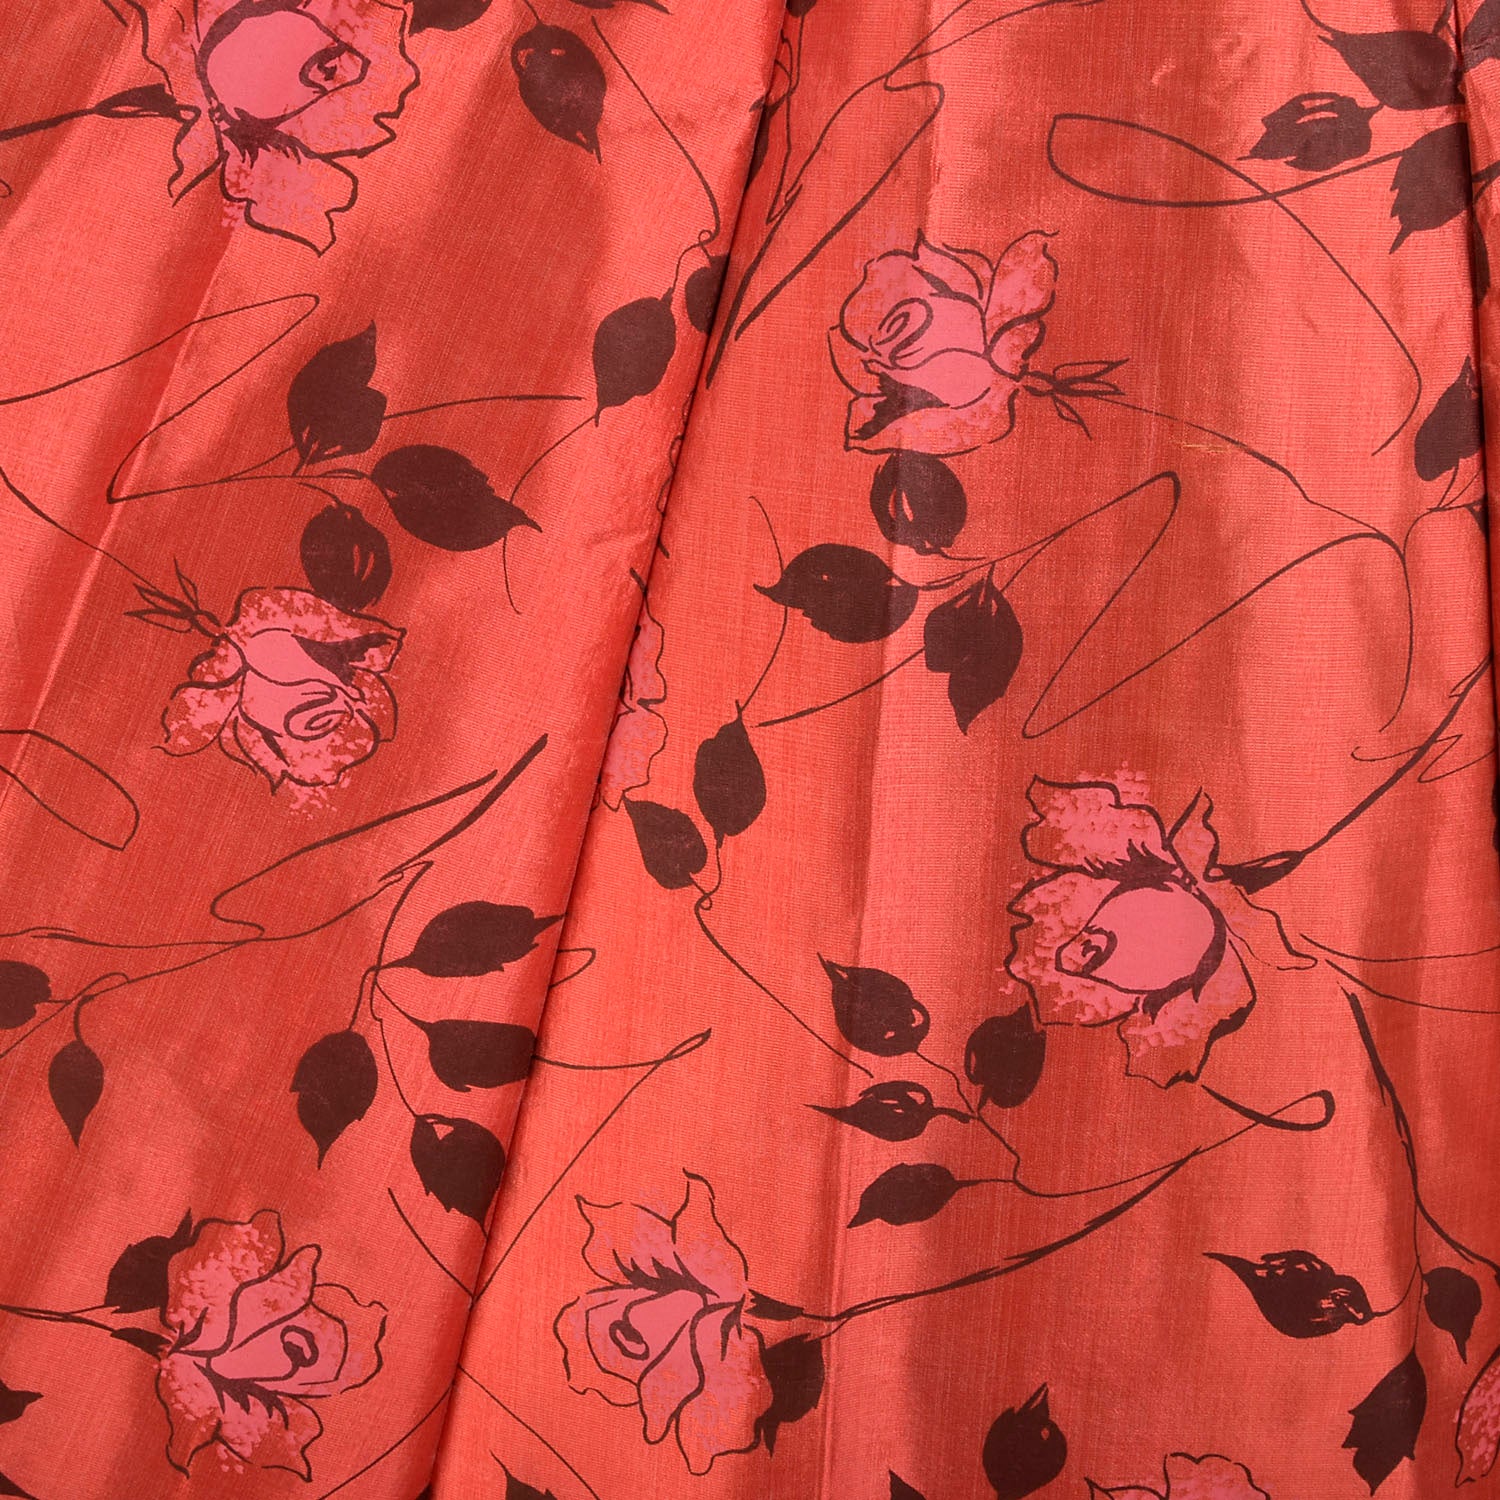 XS 1950s AS IS Red Fit & Flare Novelty Rose Print Shelf Bust Cocktail Dress